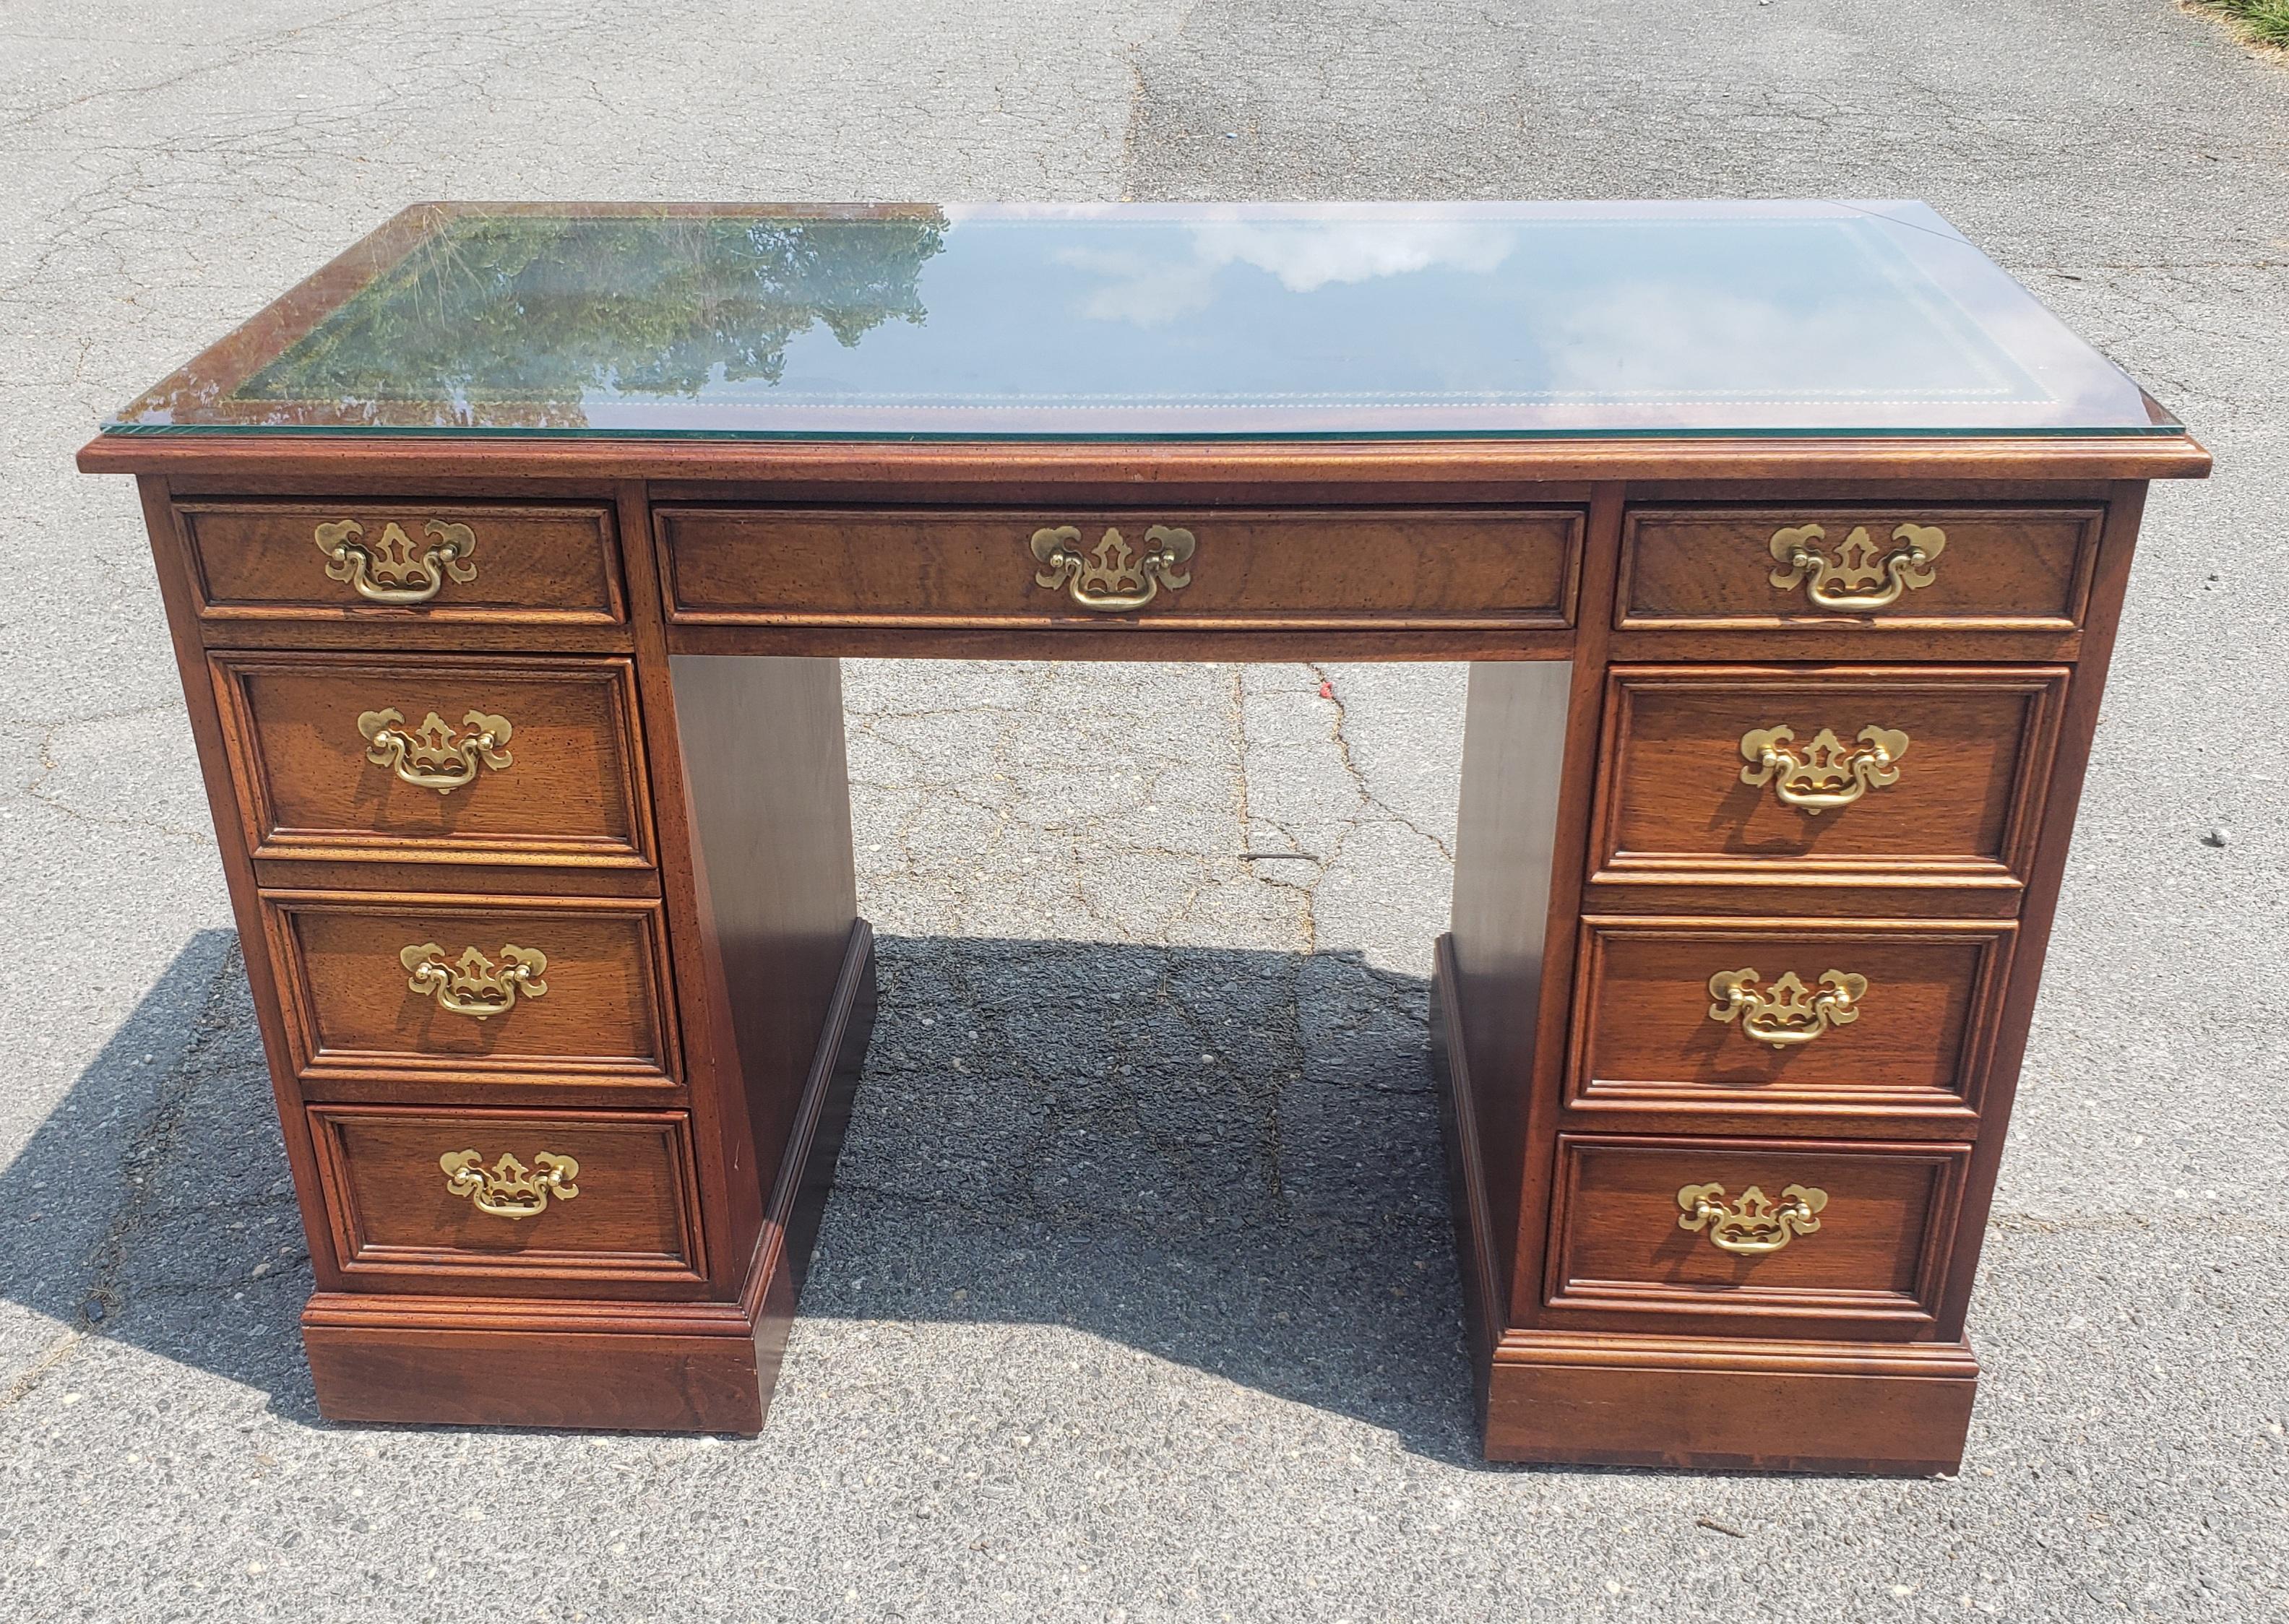 A Sligh Furniture Chippendale Mahogany and Tooled Leather Partners Desk with protective Glass top in great condition. 
All drawers with dovetail construction and working flawlessly.